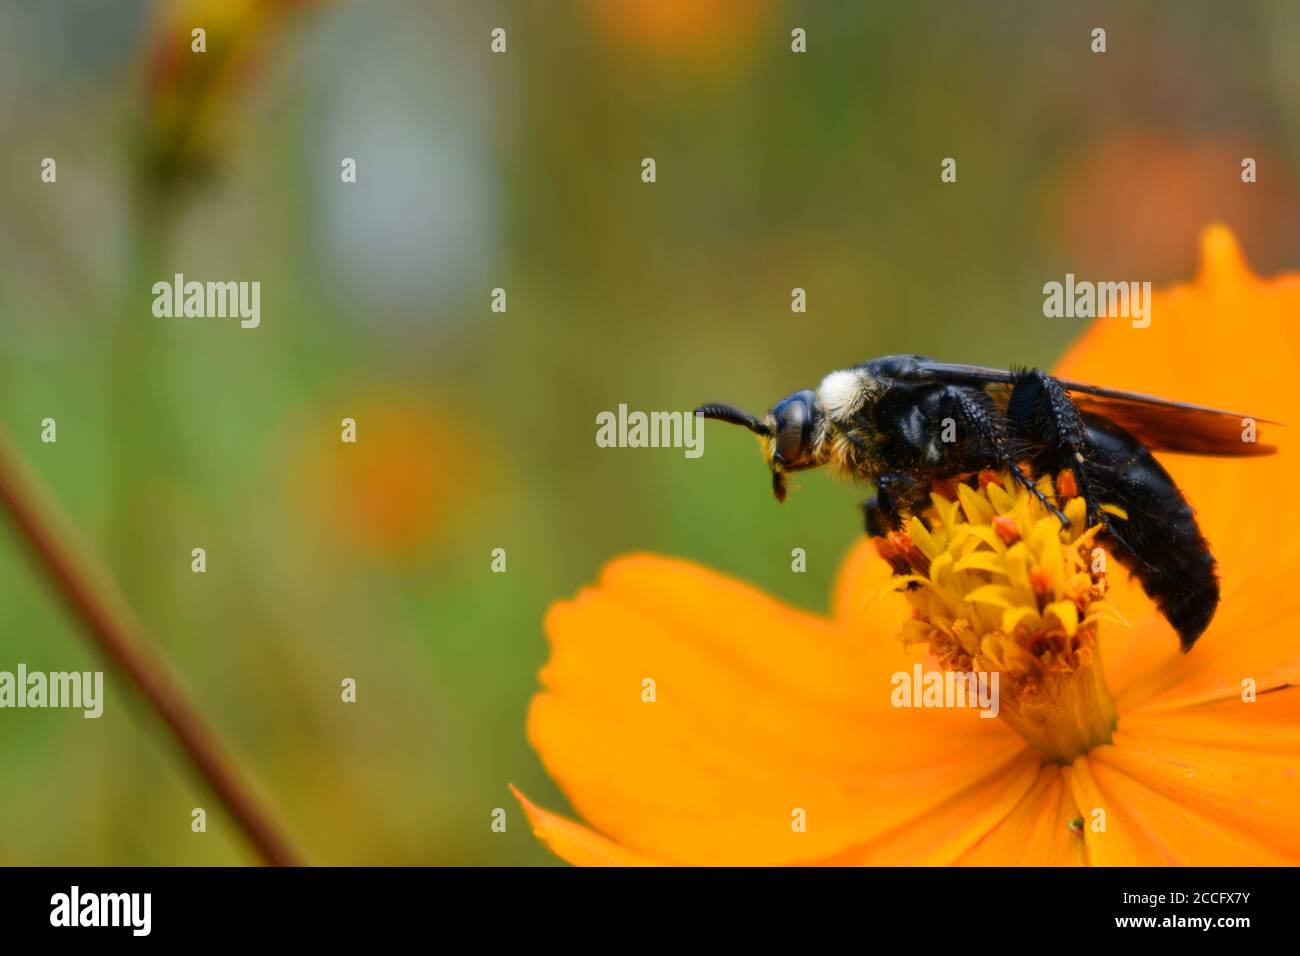 A mining bee perched on a cosmos flower. Stock Photo